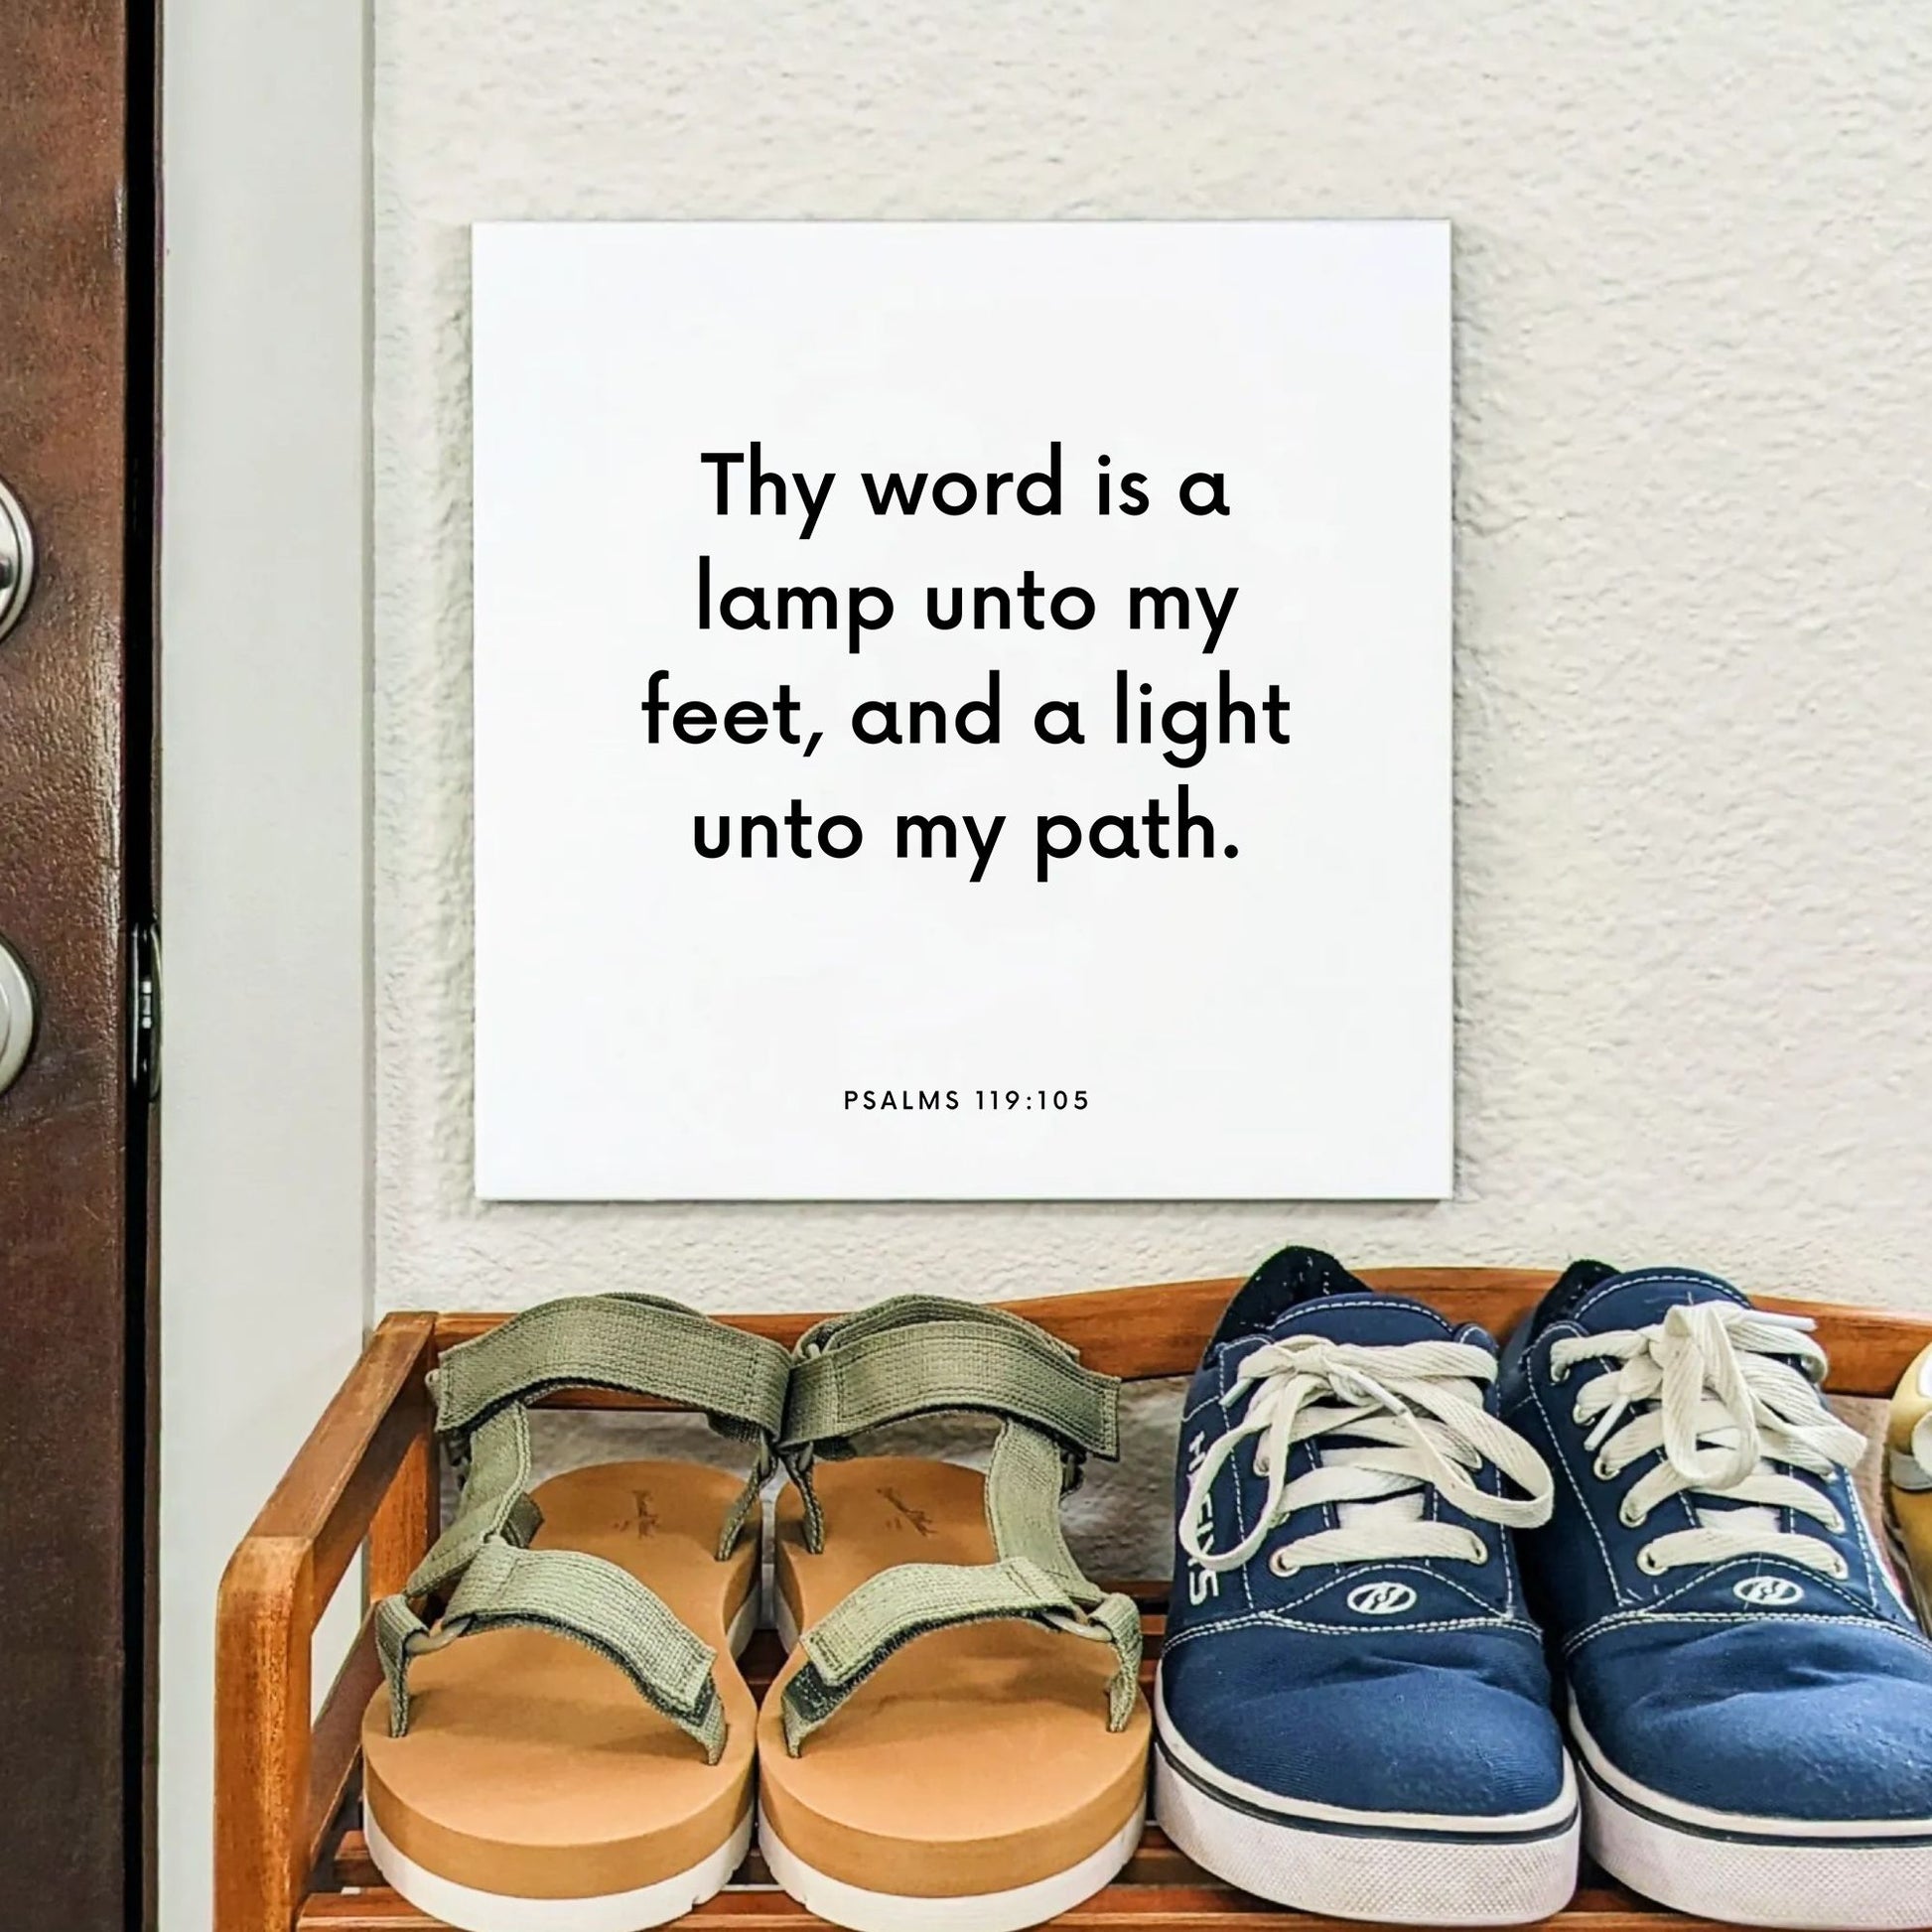 Shoes mouting of the scripture tile for Psalms 119:105 - "Thy word is a lamp unto my feet, and a light unto my path"